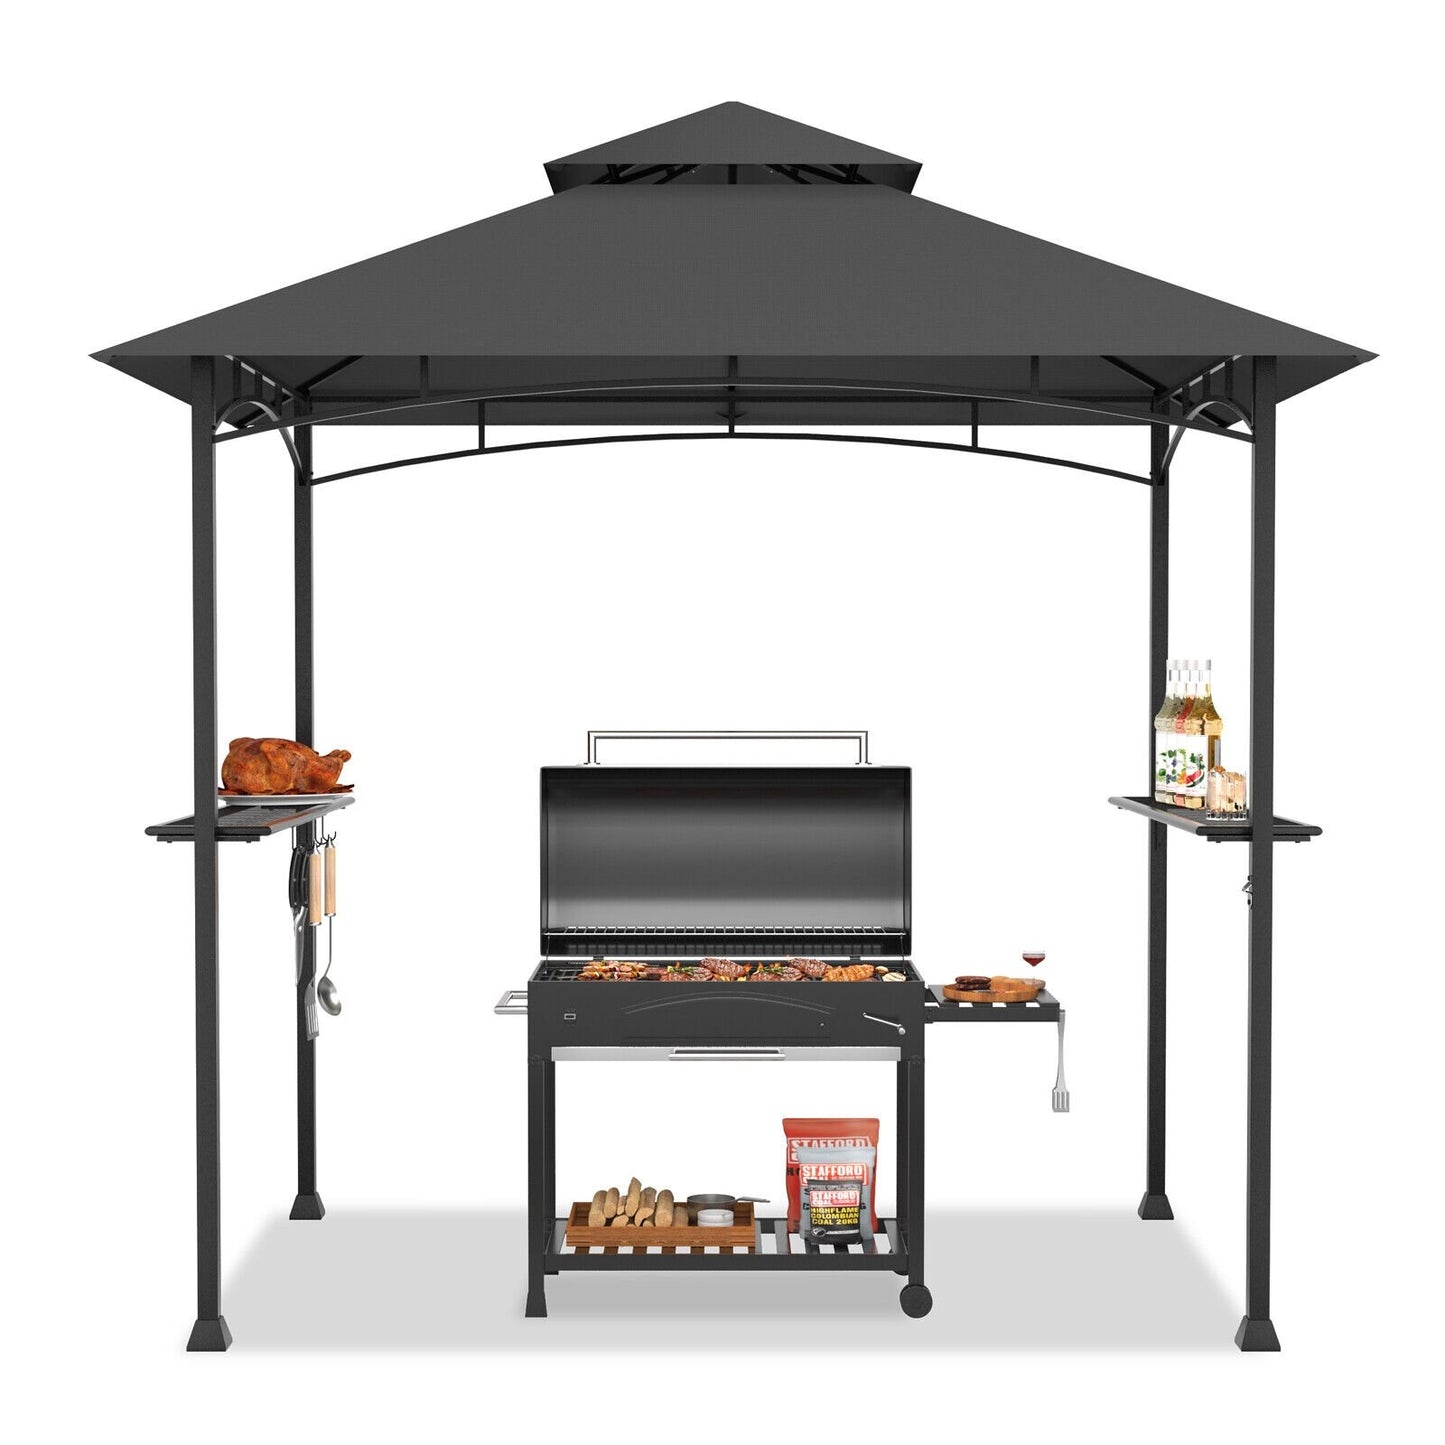 8 x 5 Feet Outdoor Barbecue Grill Gazebo Canopy Tent BBQ Shelter, Dark Gray